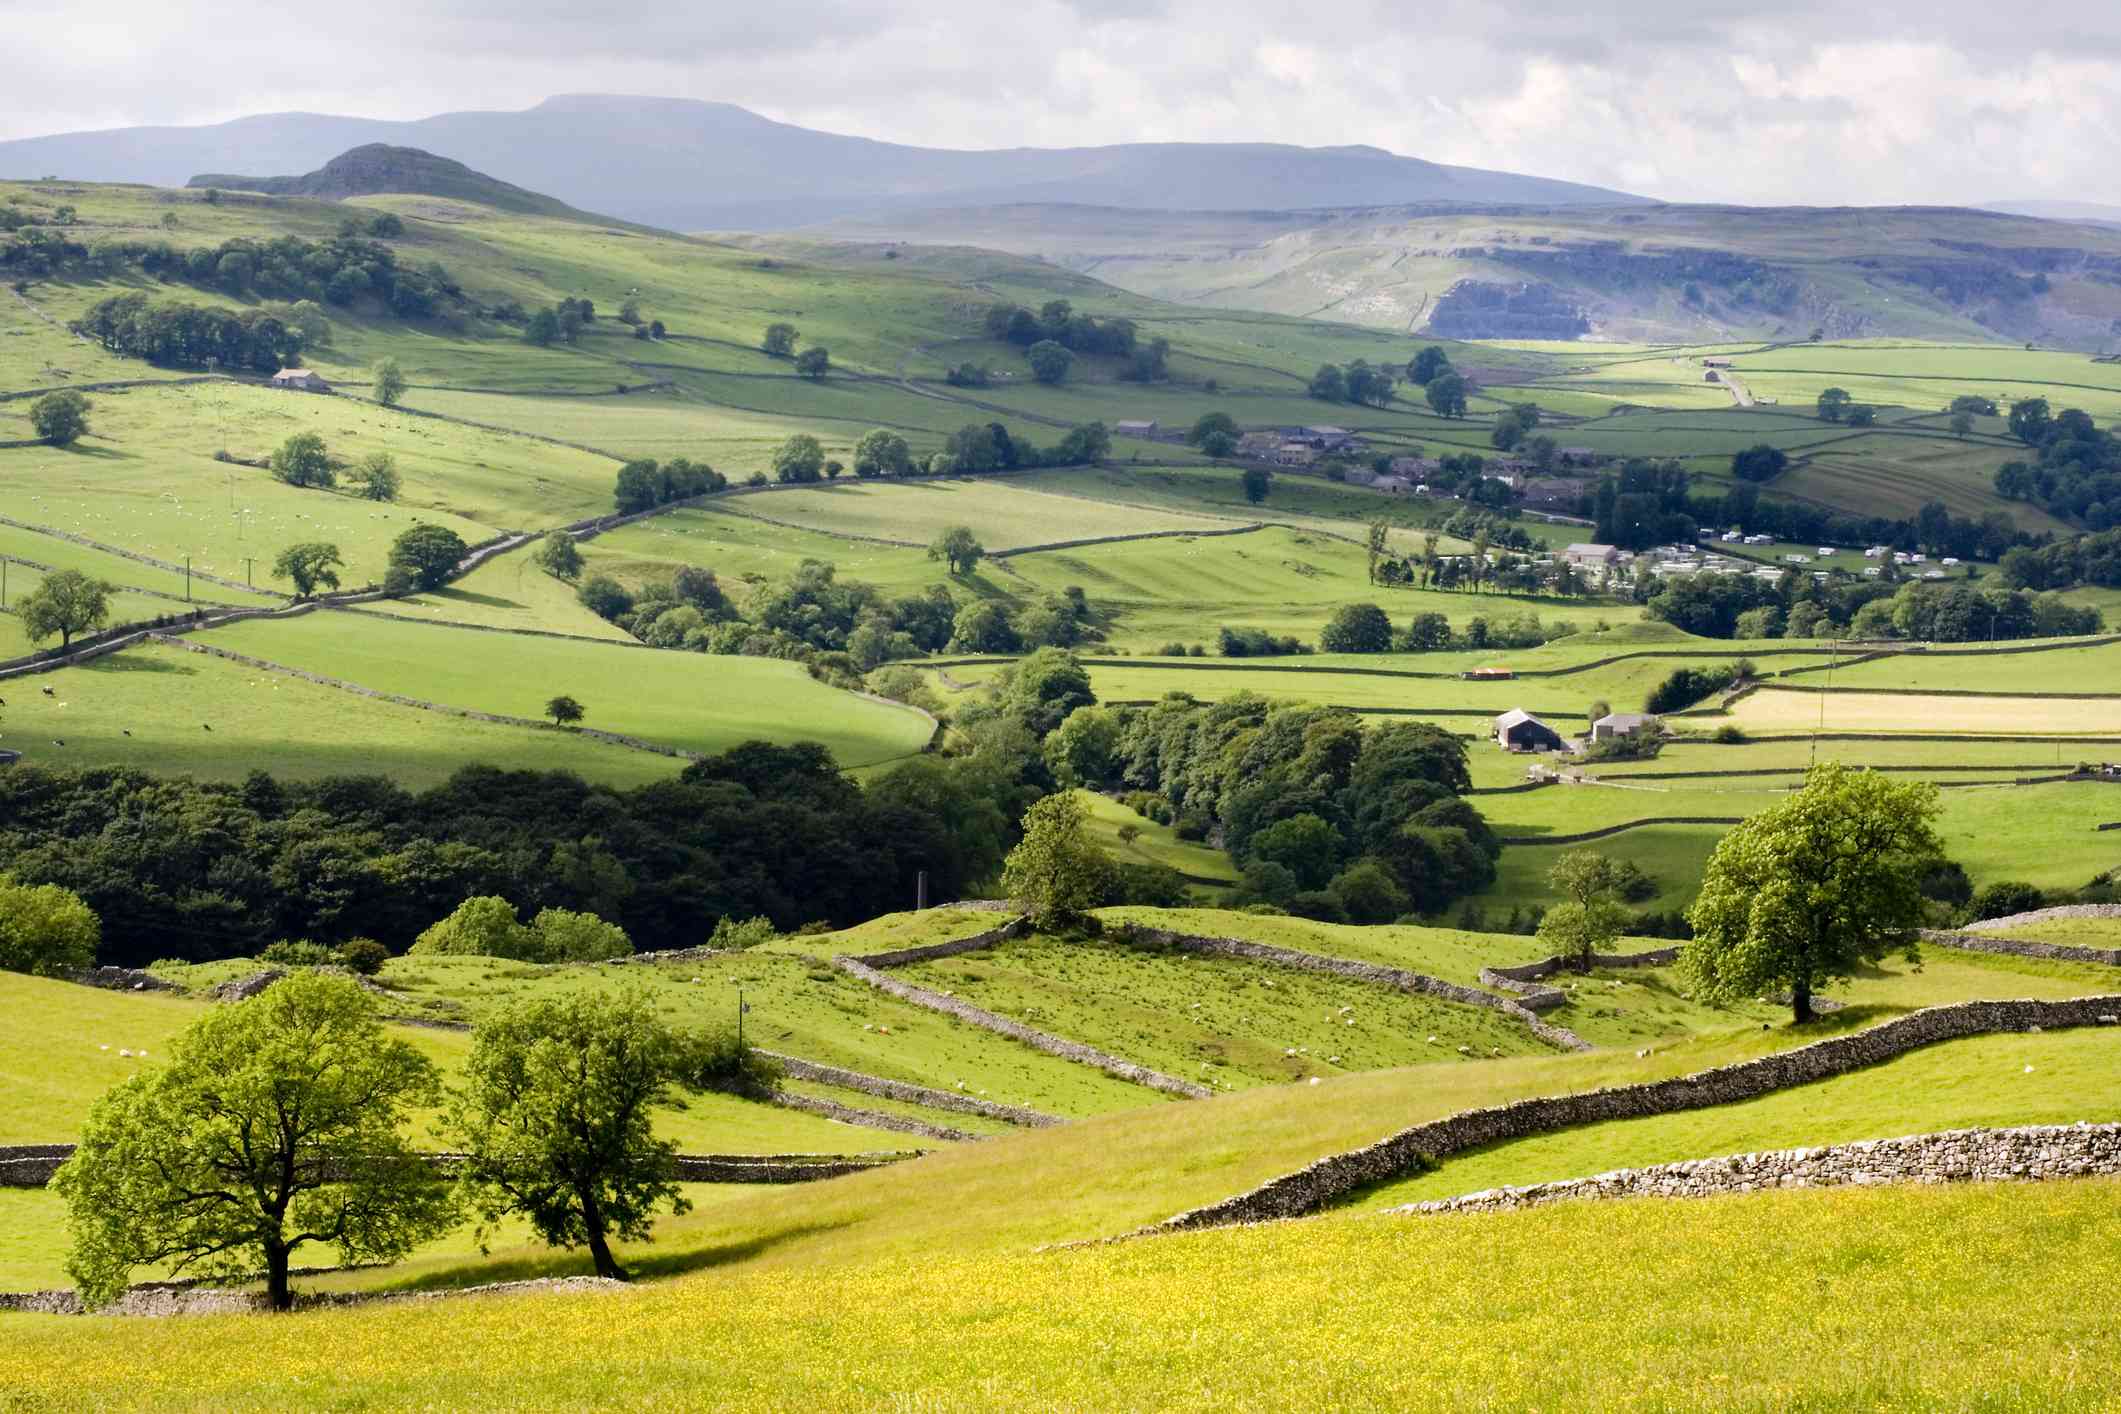 The Family Adventure in the Yorkshire Dales